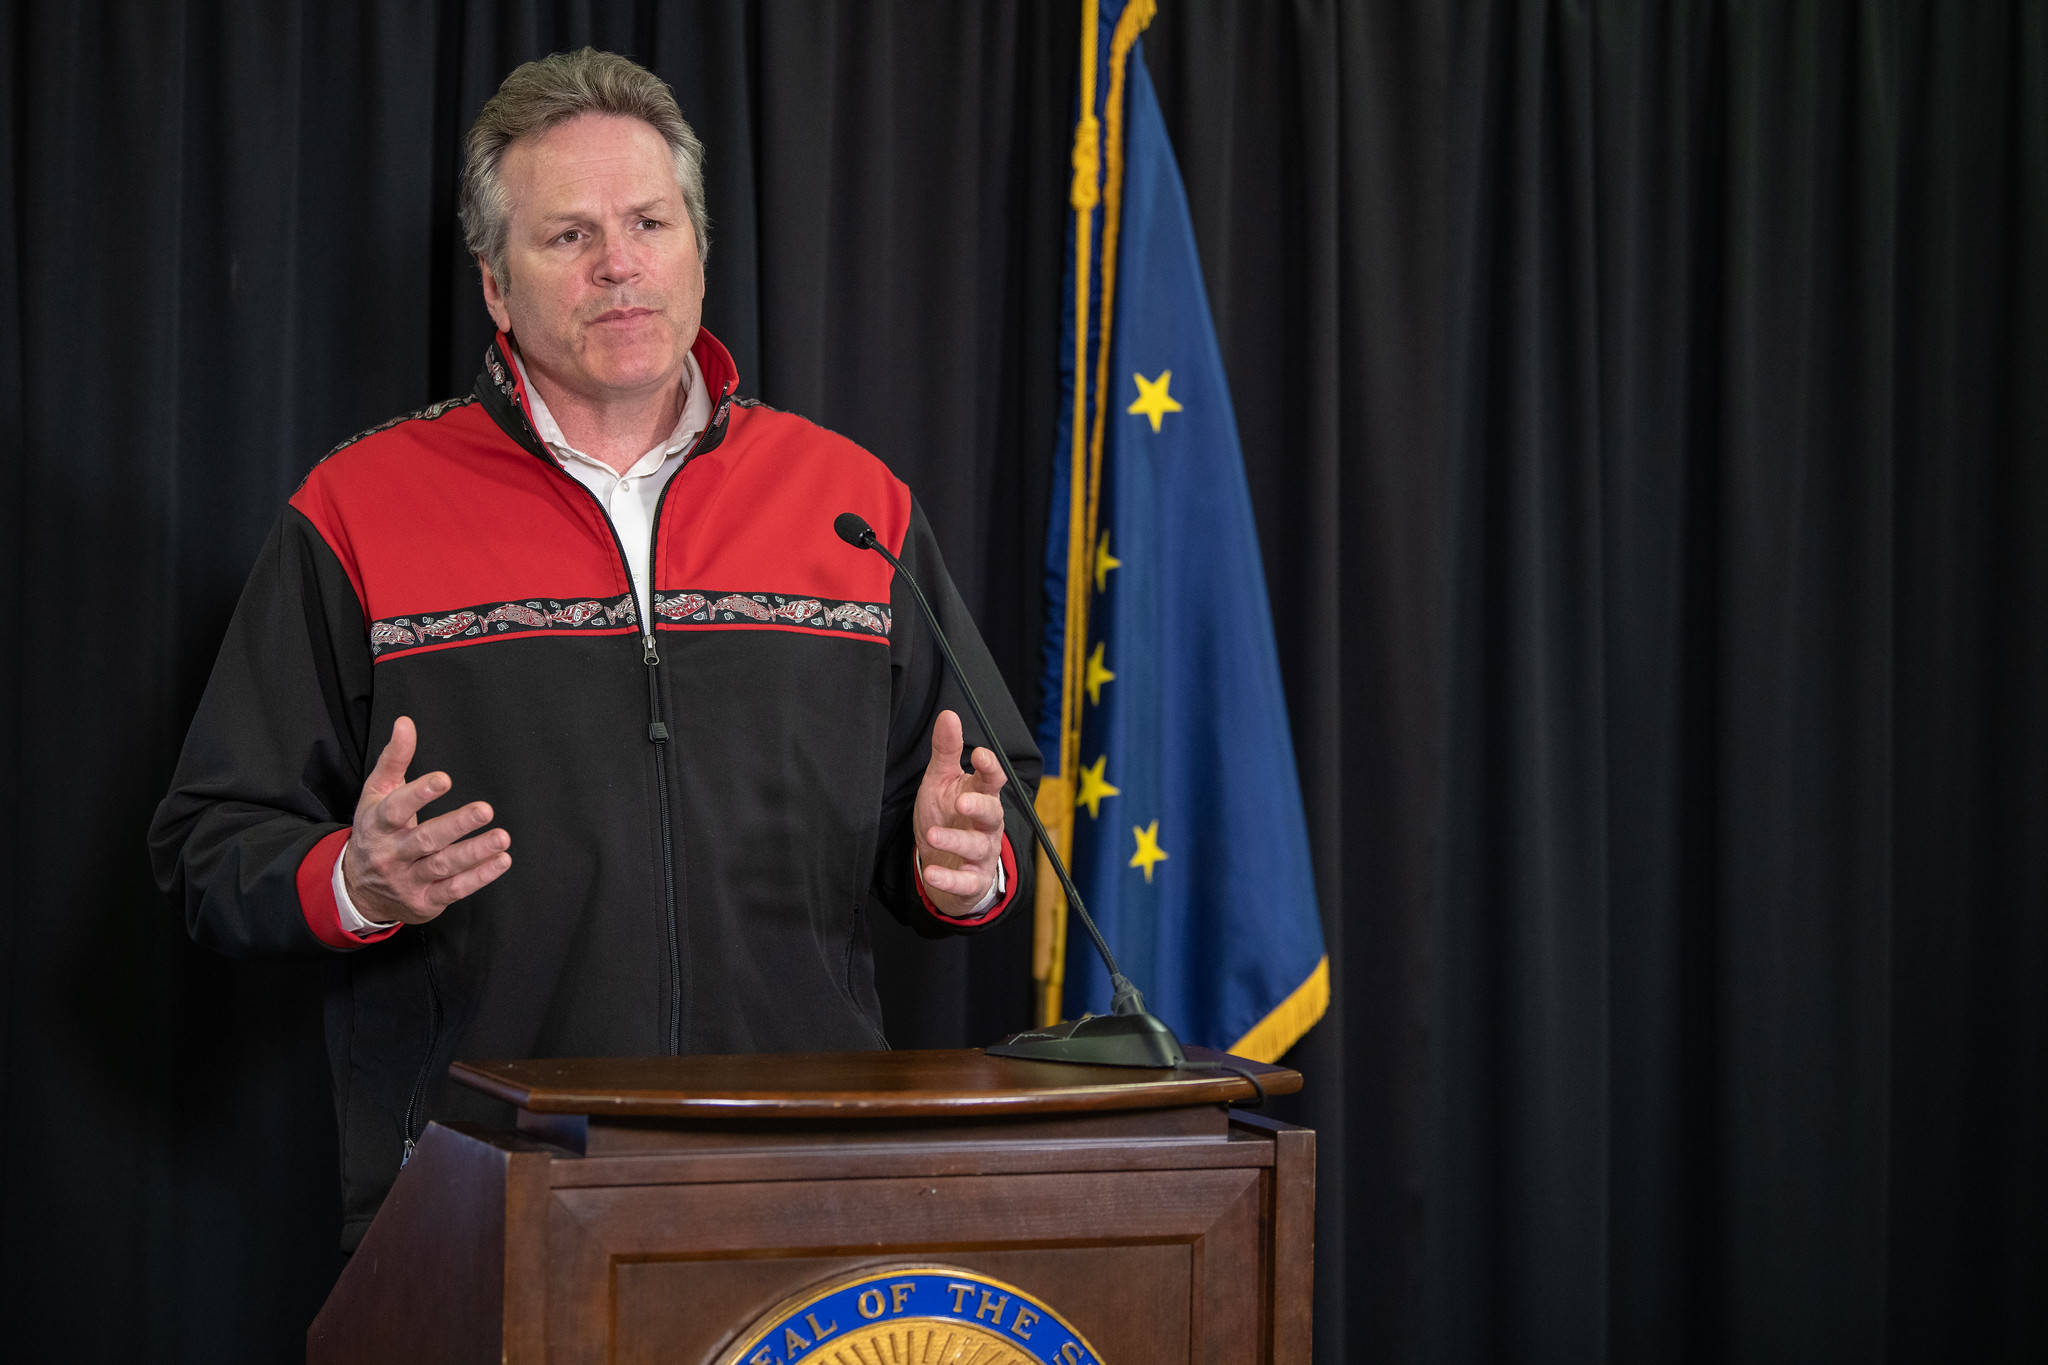 Gov. Mike Dunleavy at a press conference in Anchorage on Monday, May 11, 2020. Dunleavy had hoped to send out federal funds using a limited legal process, saying expediency was key. But a Juneau man’s lawsuit is calling lawmakers back to the Capitol. (Courtesy photo | Office of Gov. Mike Dunleavy)